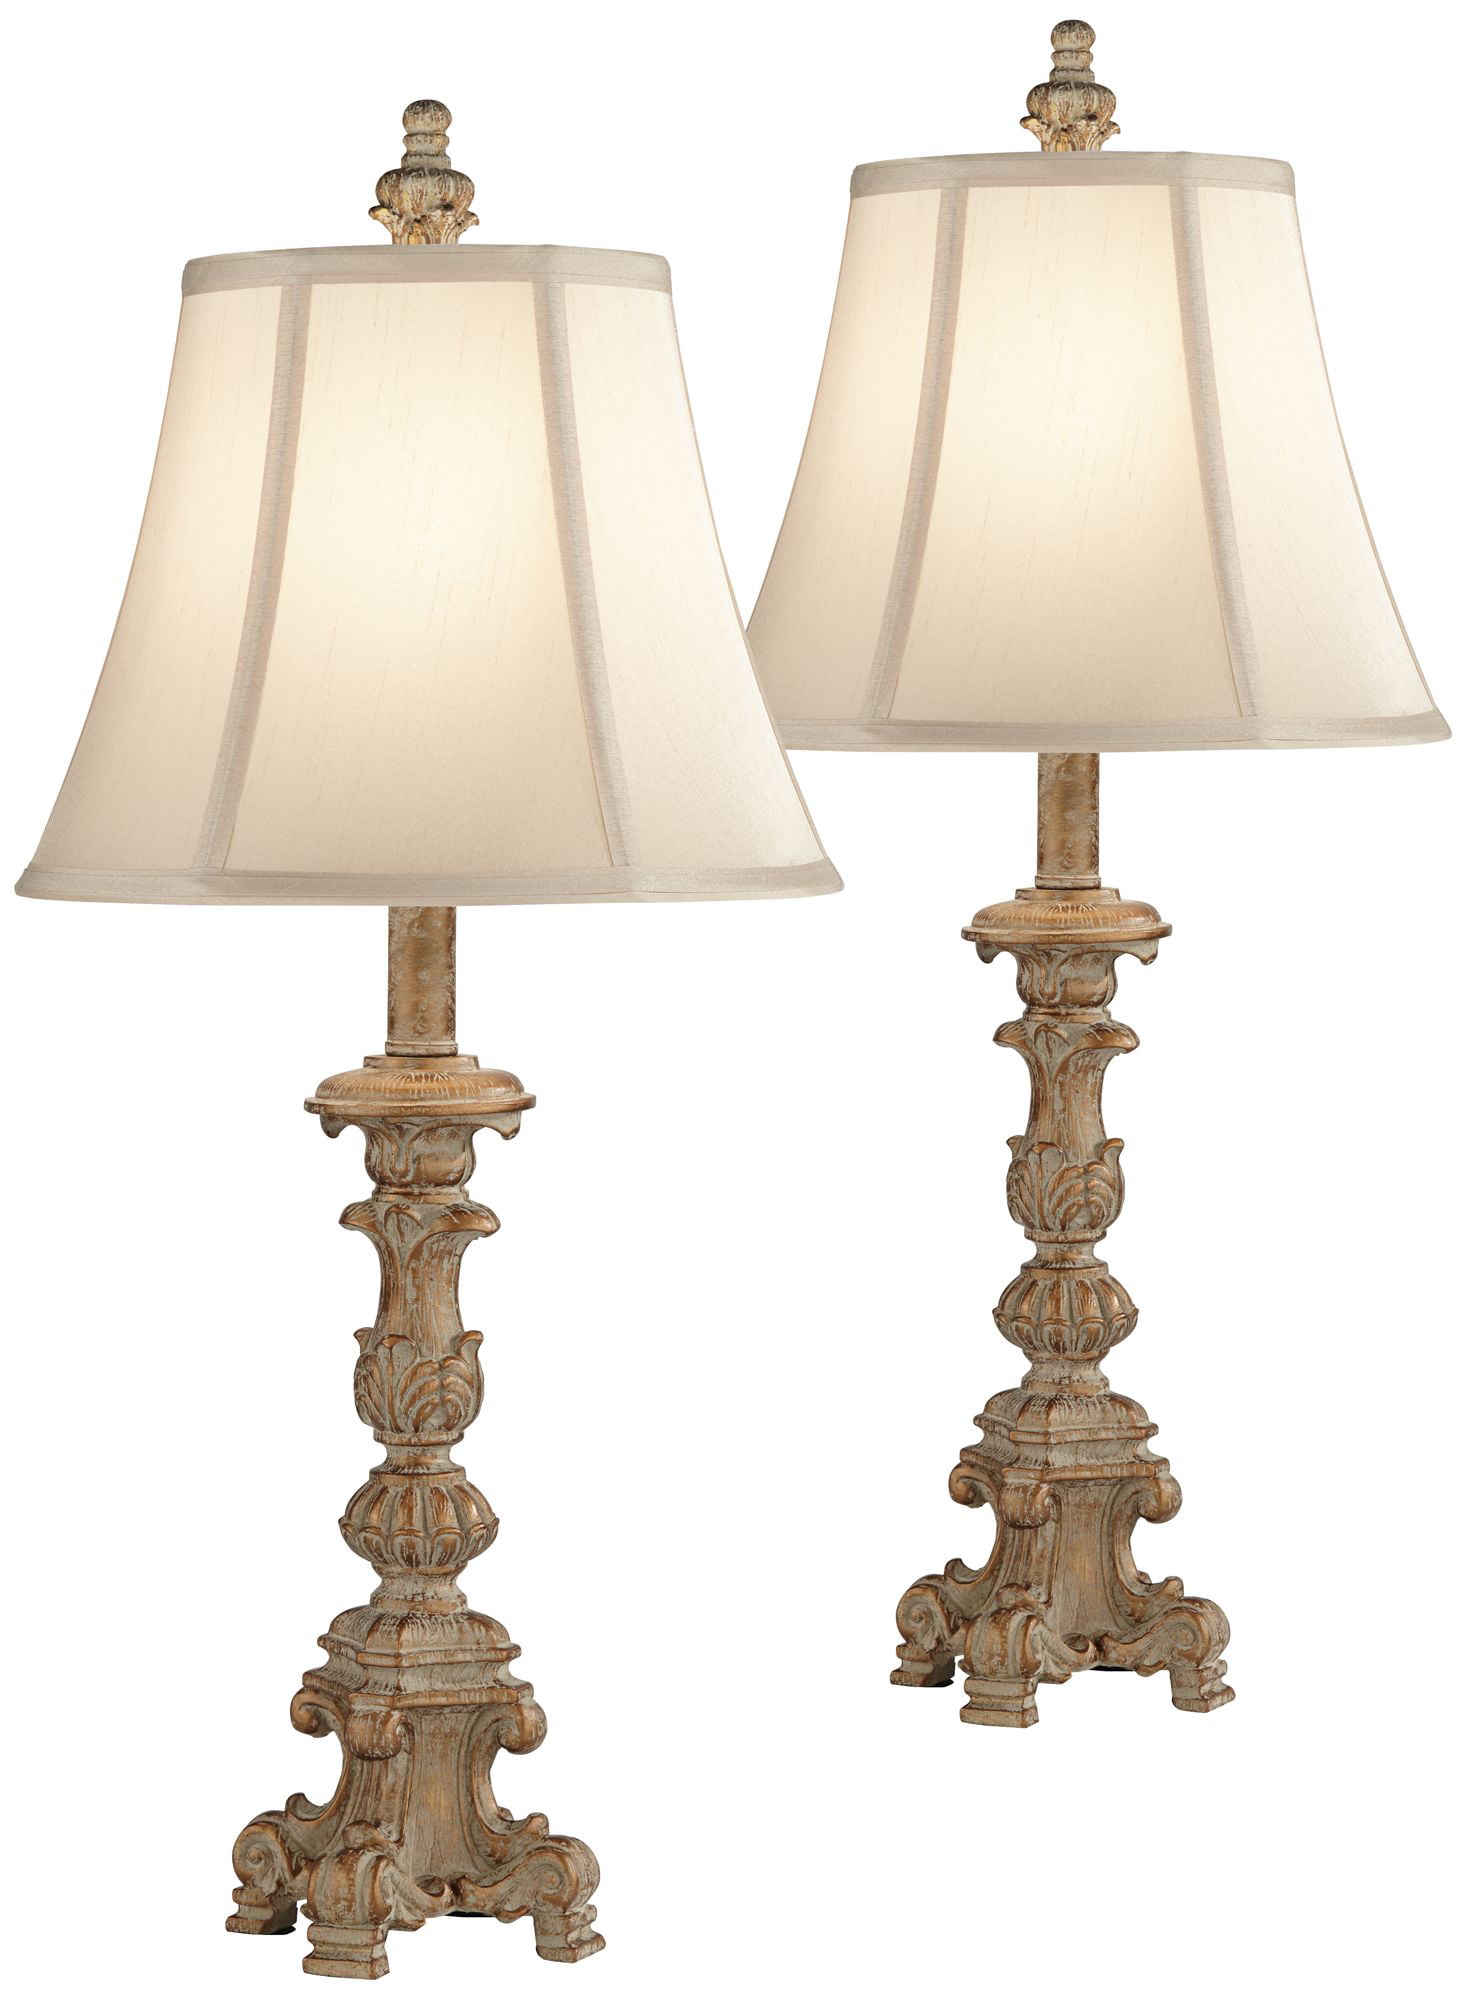 Regency Hill Shabby Chic Table Lamps, Shabby Chic Table Lamp Shades